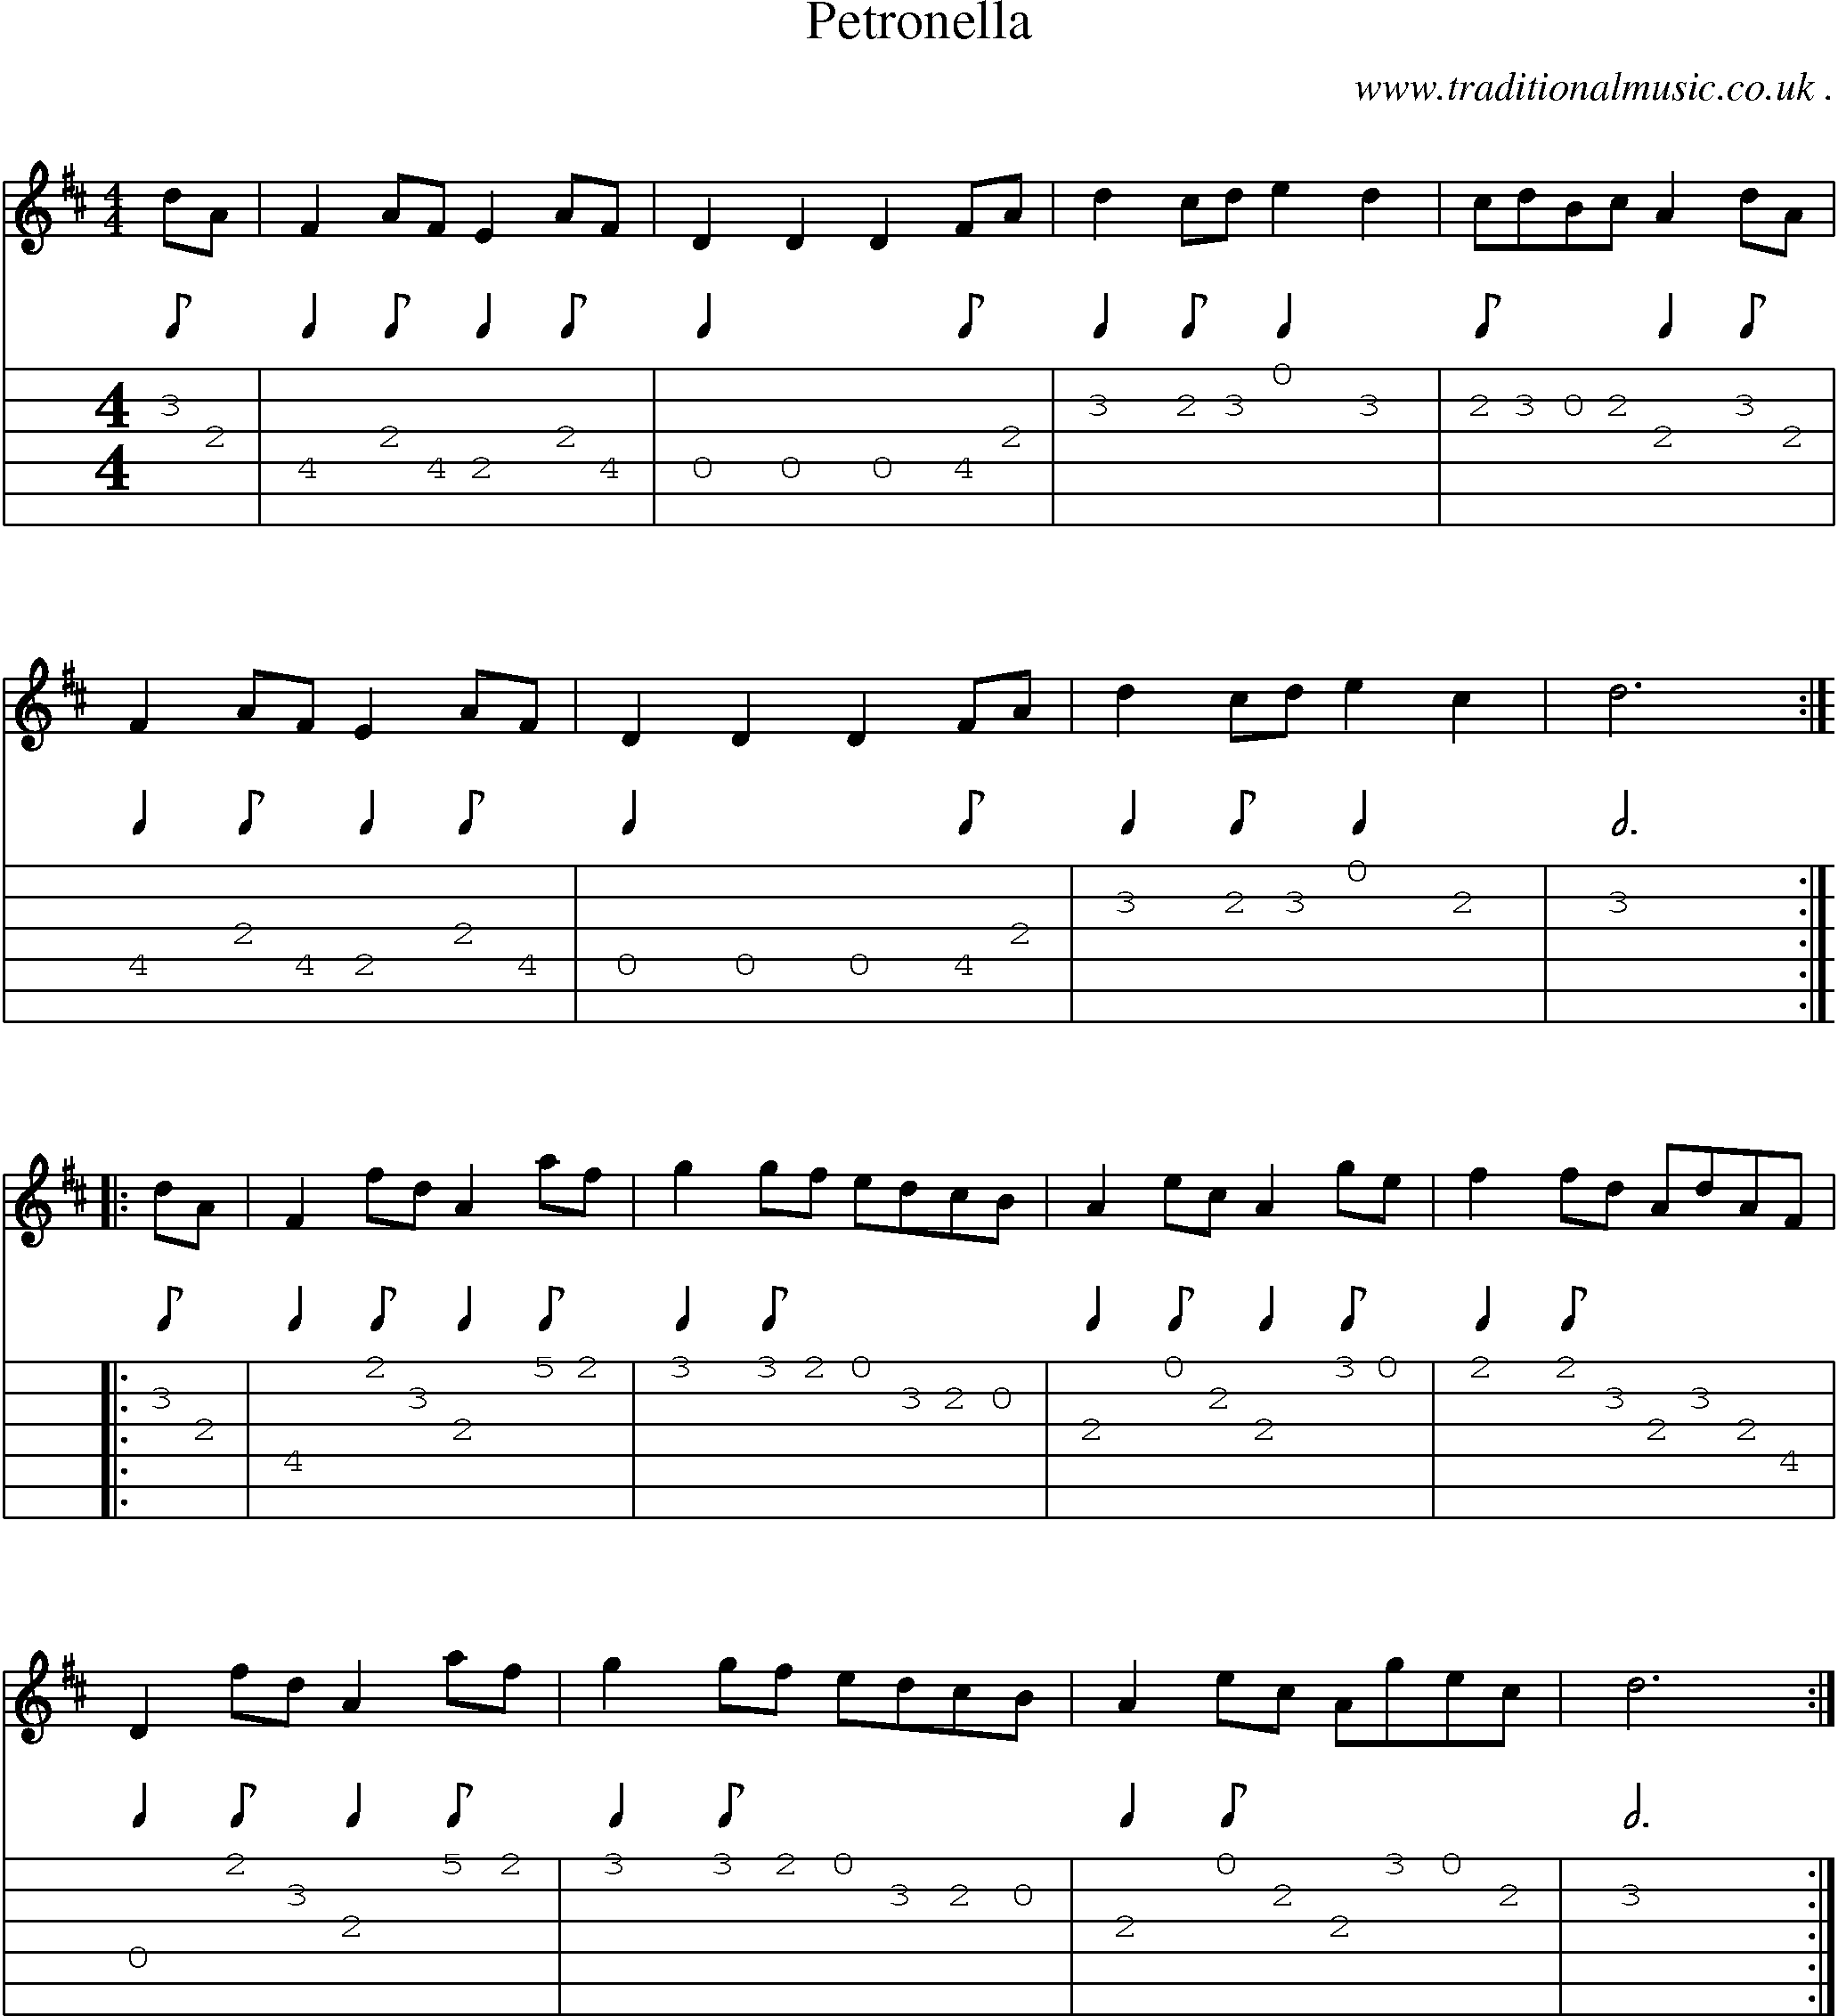 Sheet-Music and Guitar Tabs for Petronella